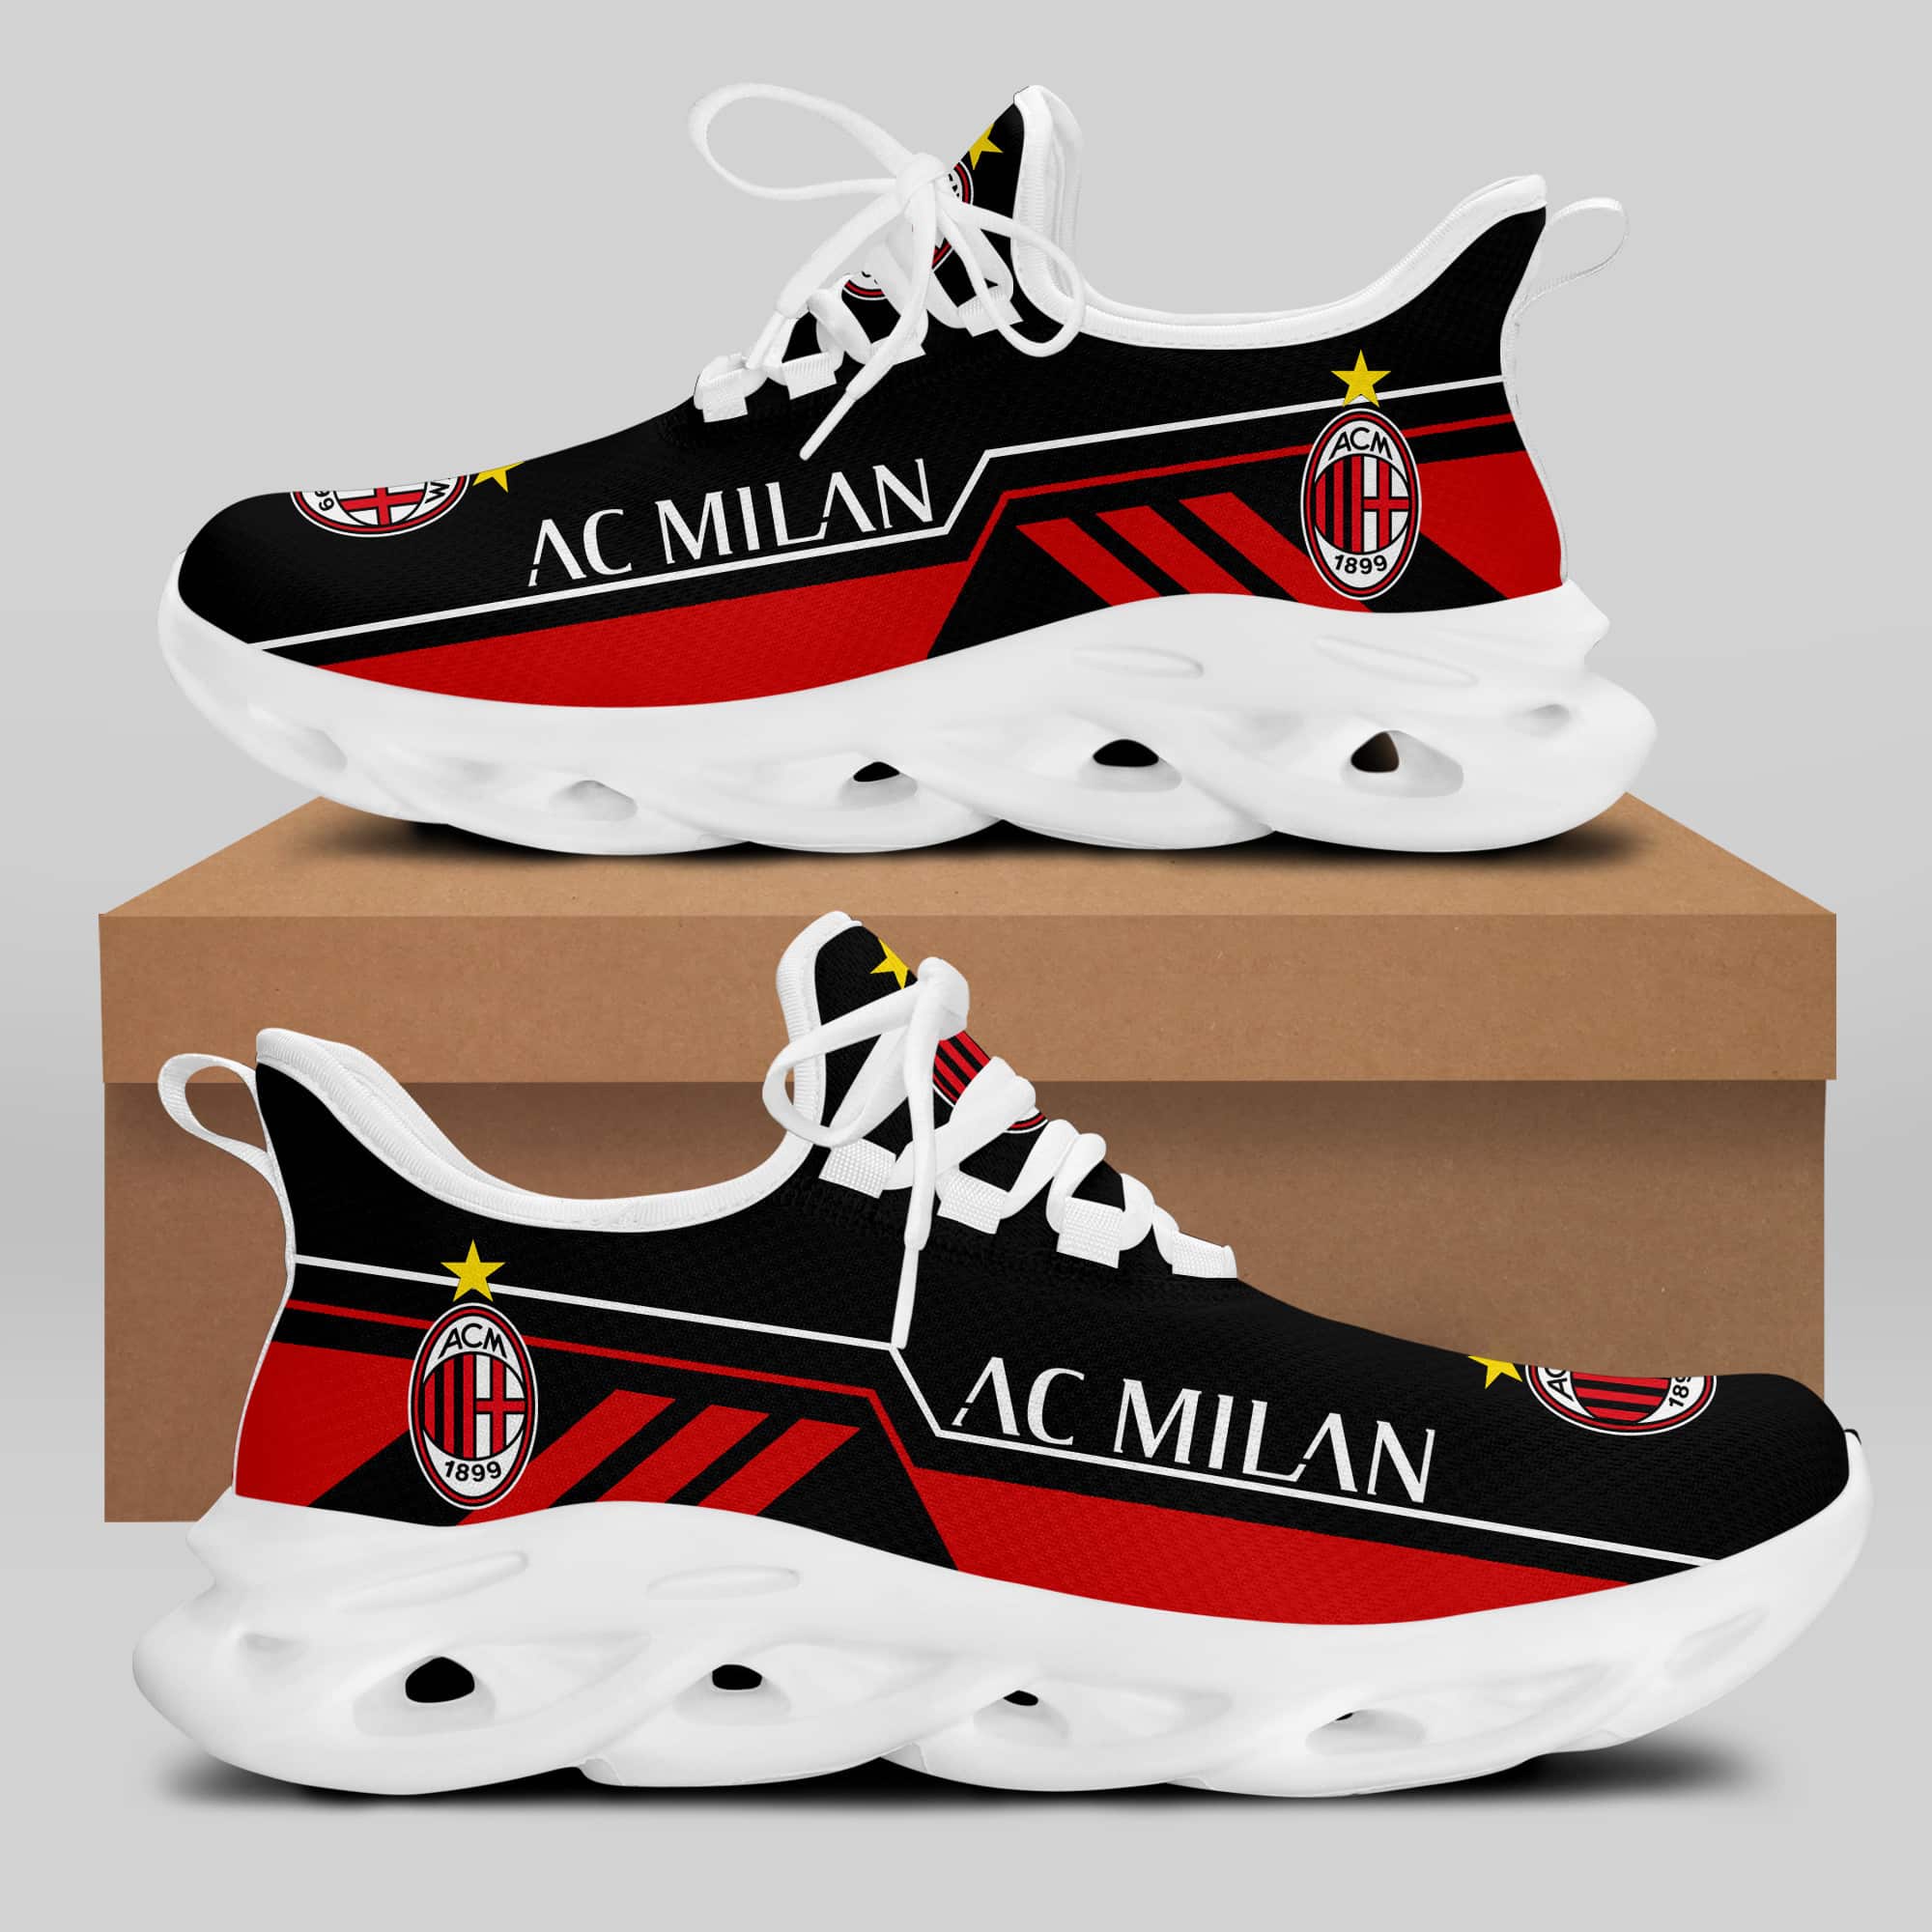 Ac Milan Running Shoes Max Soul Shoes Sneakers Ver 14 2